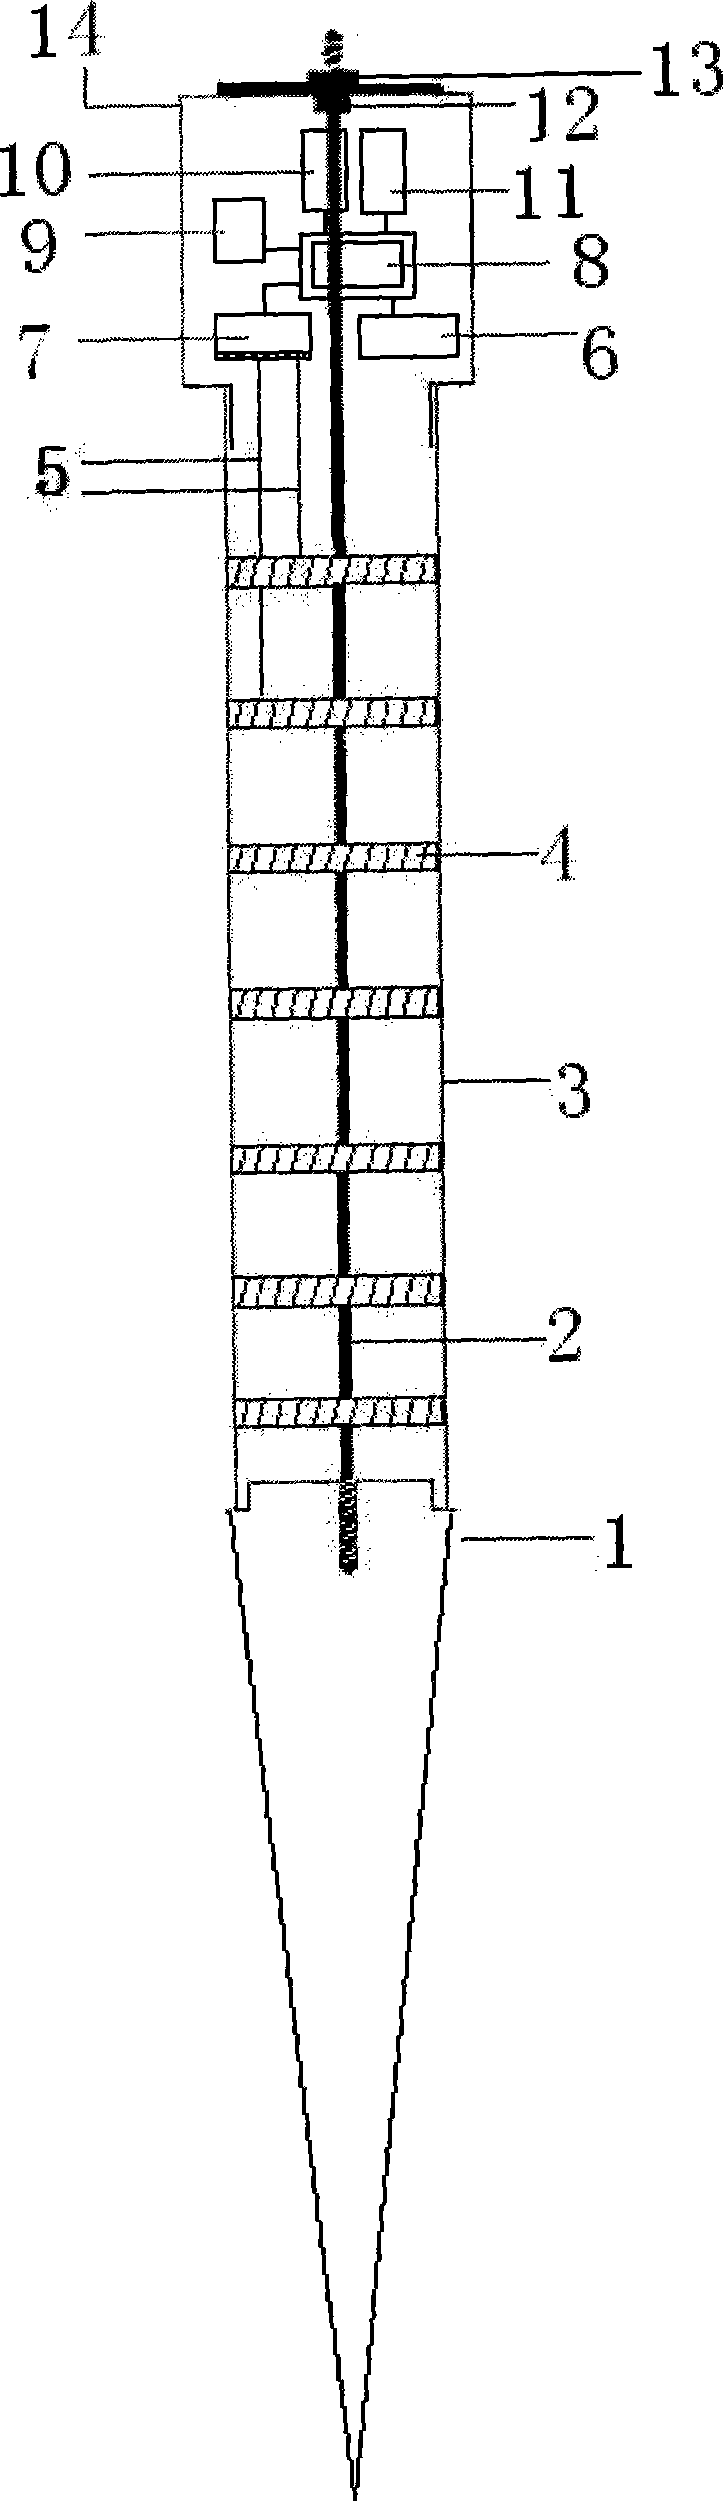 Resistivity monitoring method and apparatus for sea floor erosion/deposition dynamic process